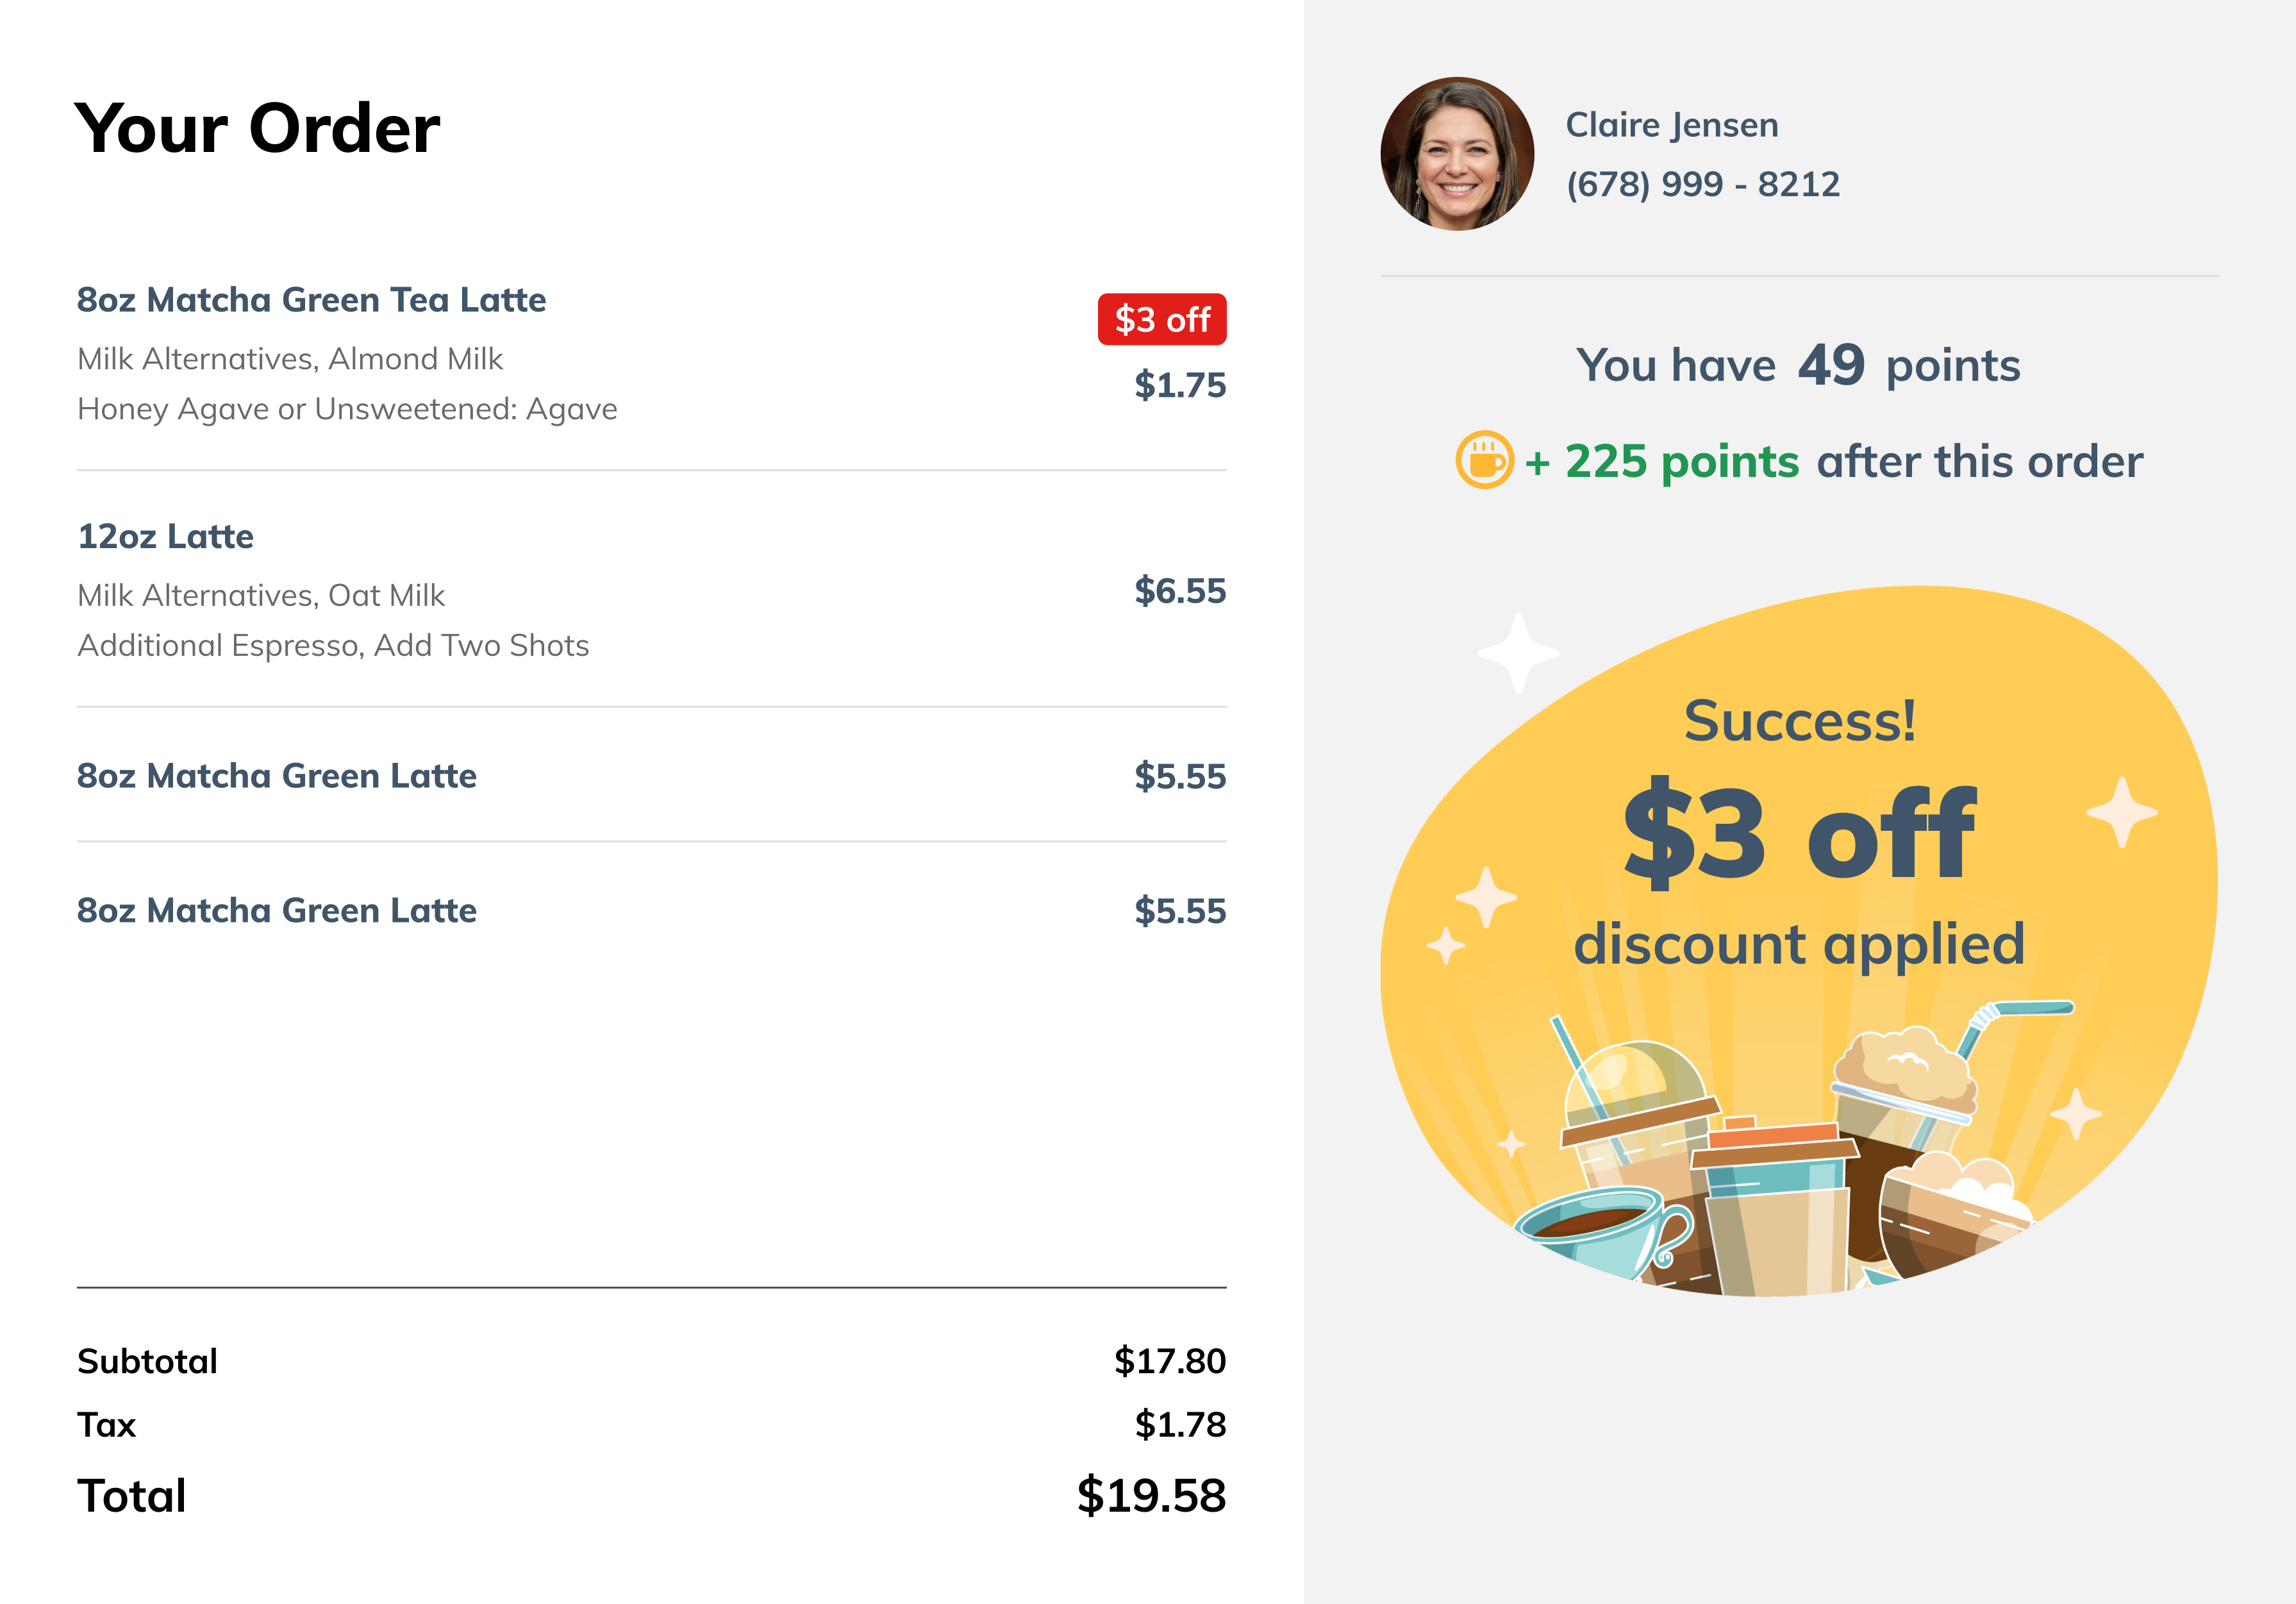 joe Point of Sale loyalty screen with ticket details, customer profile, reward points earned from order, and discount applied.